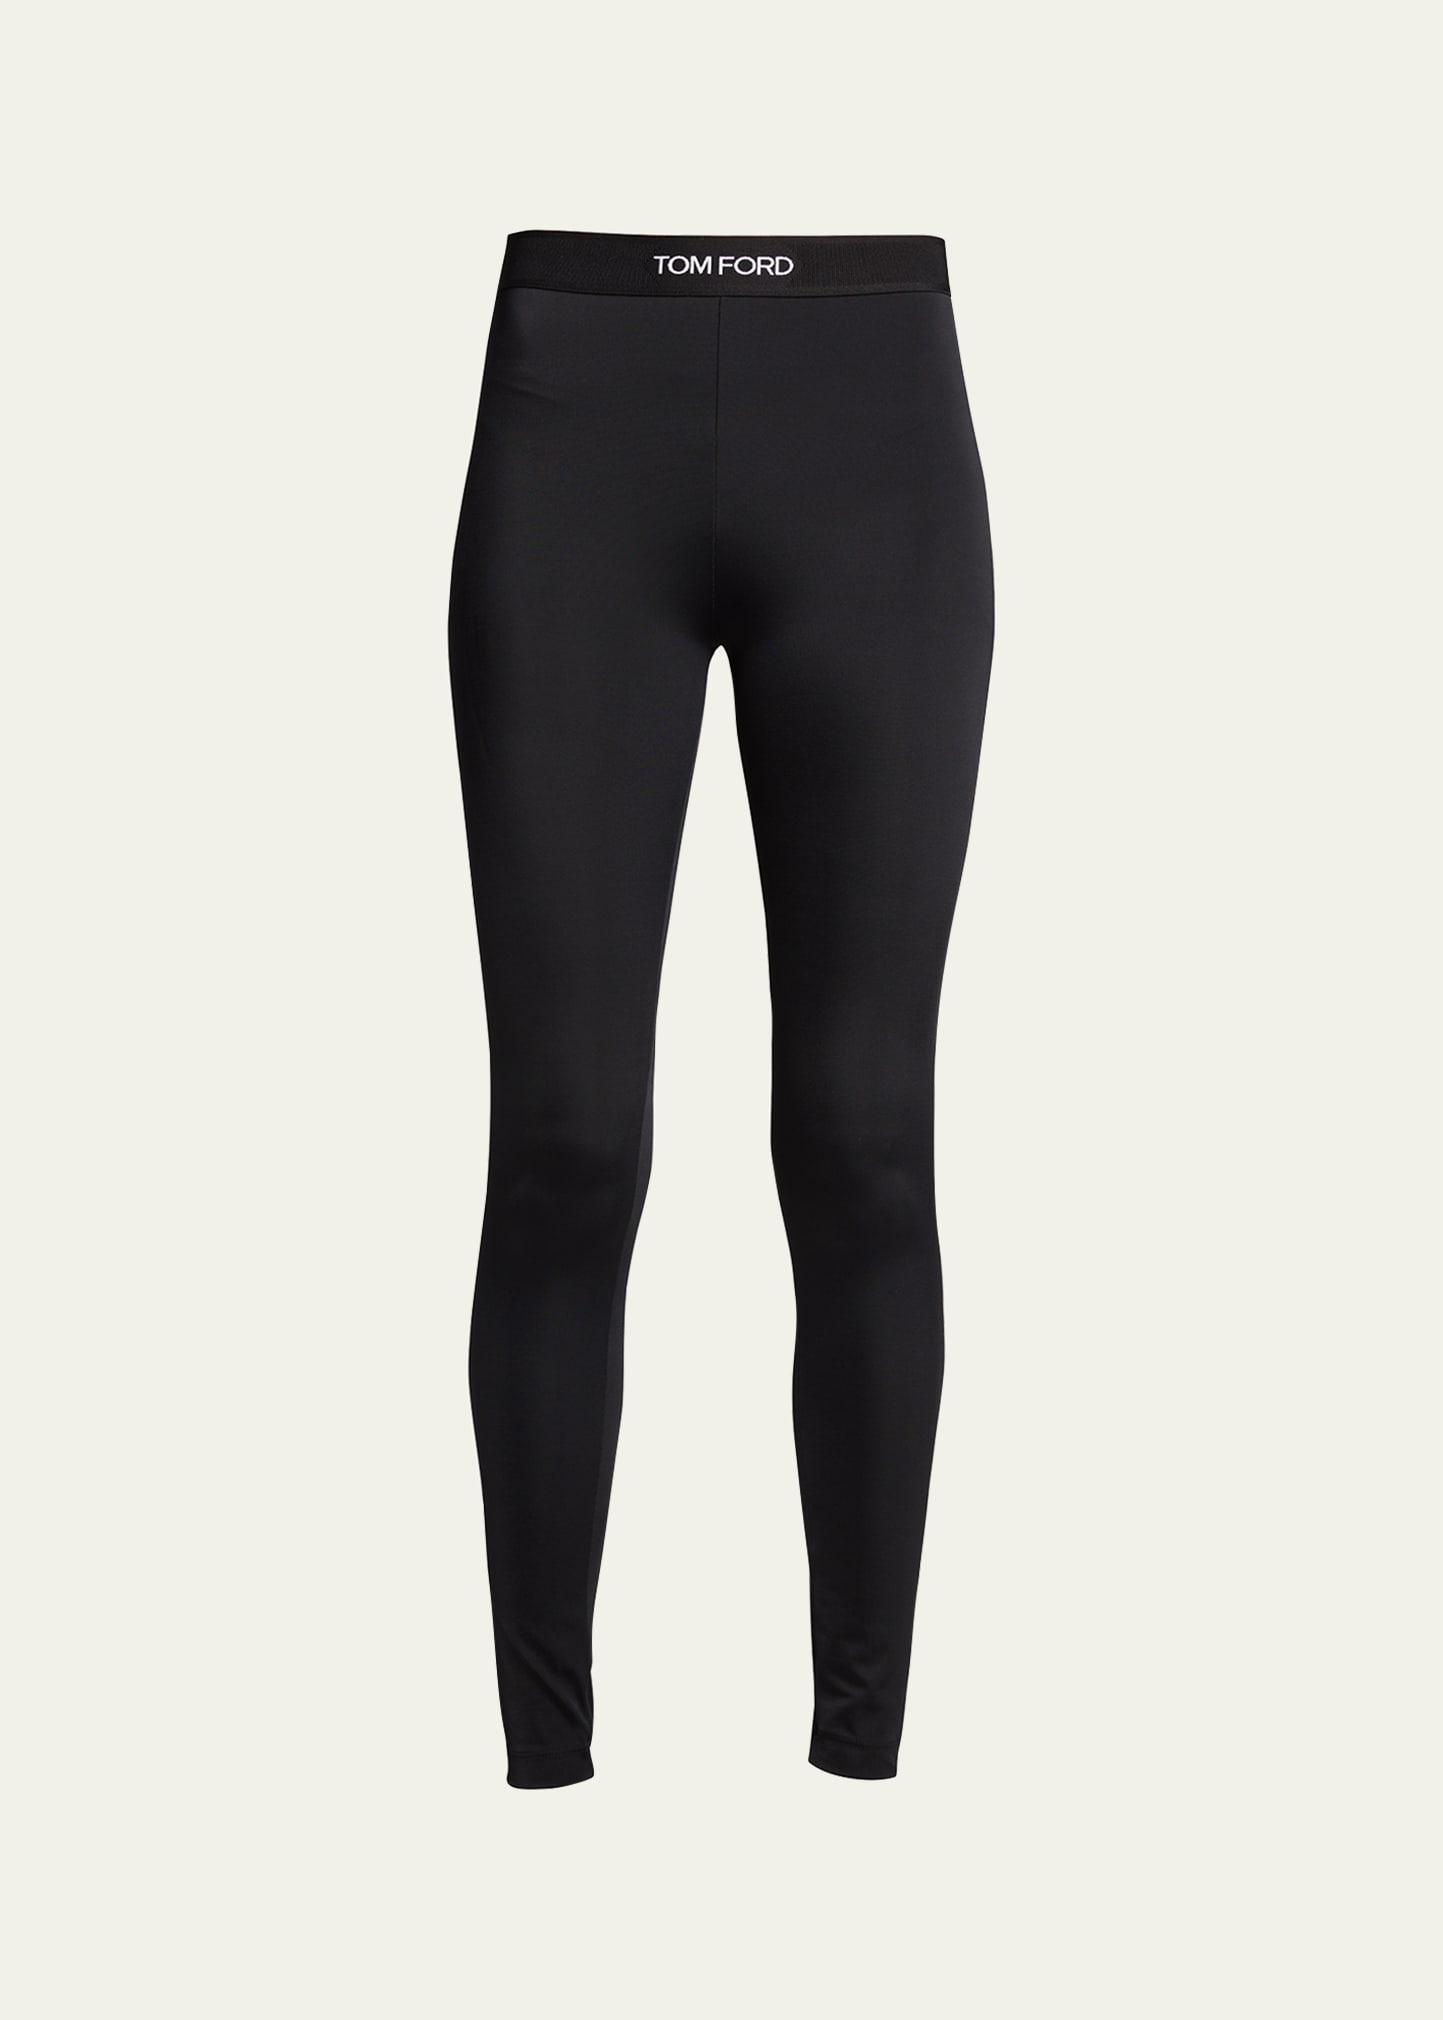 Tom Ford for Women SS24 Collection  Leggings are not pants, Cropped  leggings, Tom ford clothing